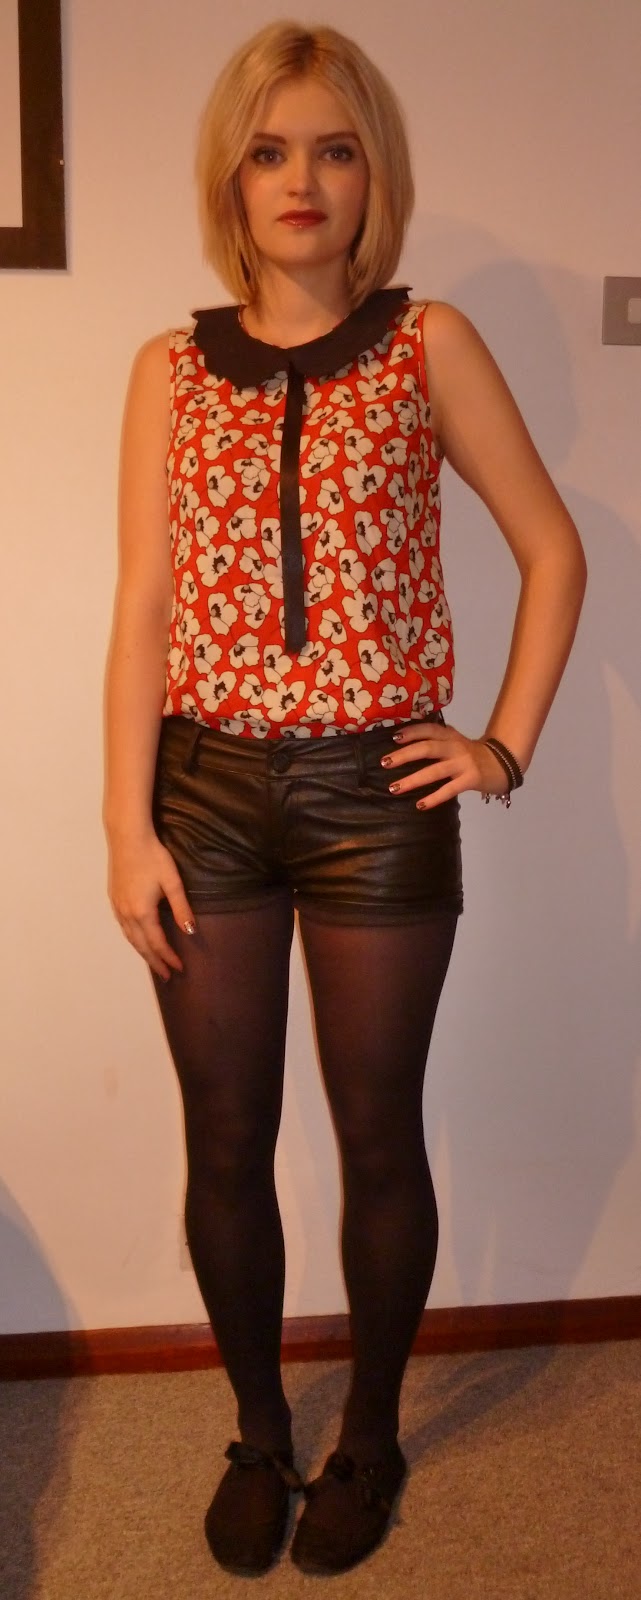 Meg's Boutique: OOTD- Leather hotpants and Peter Pan